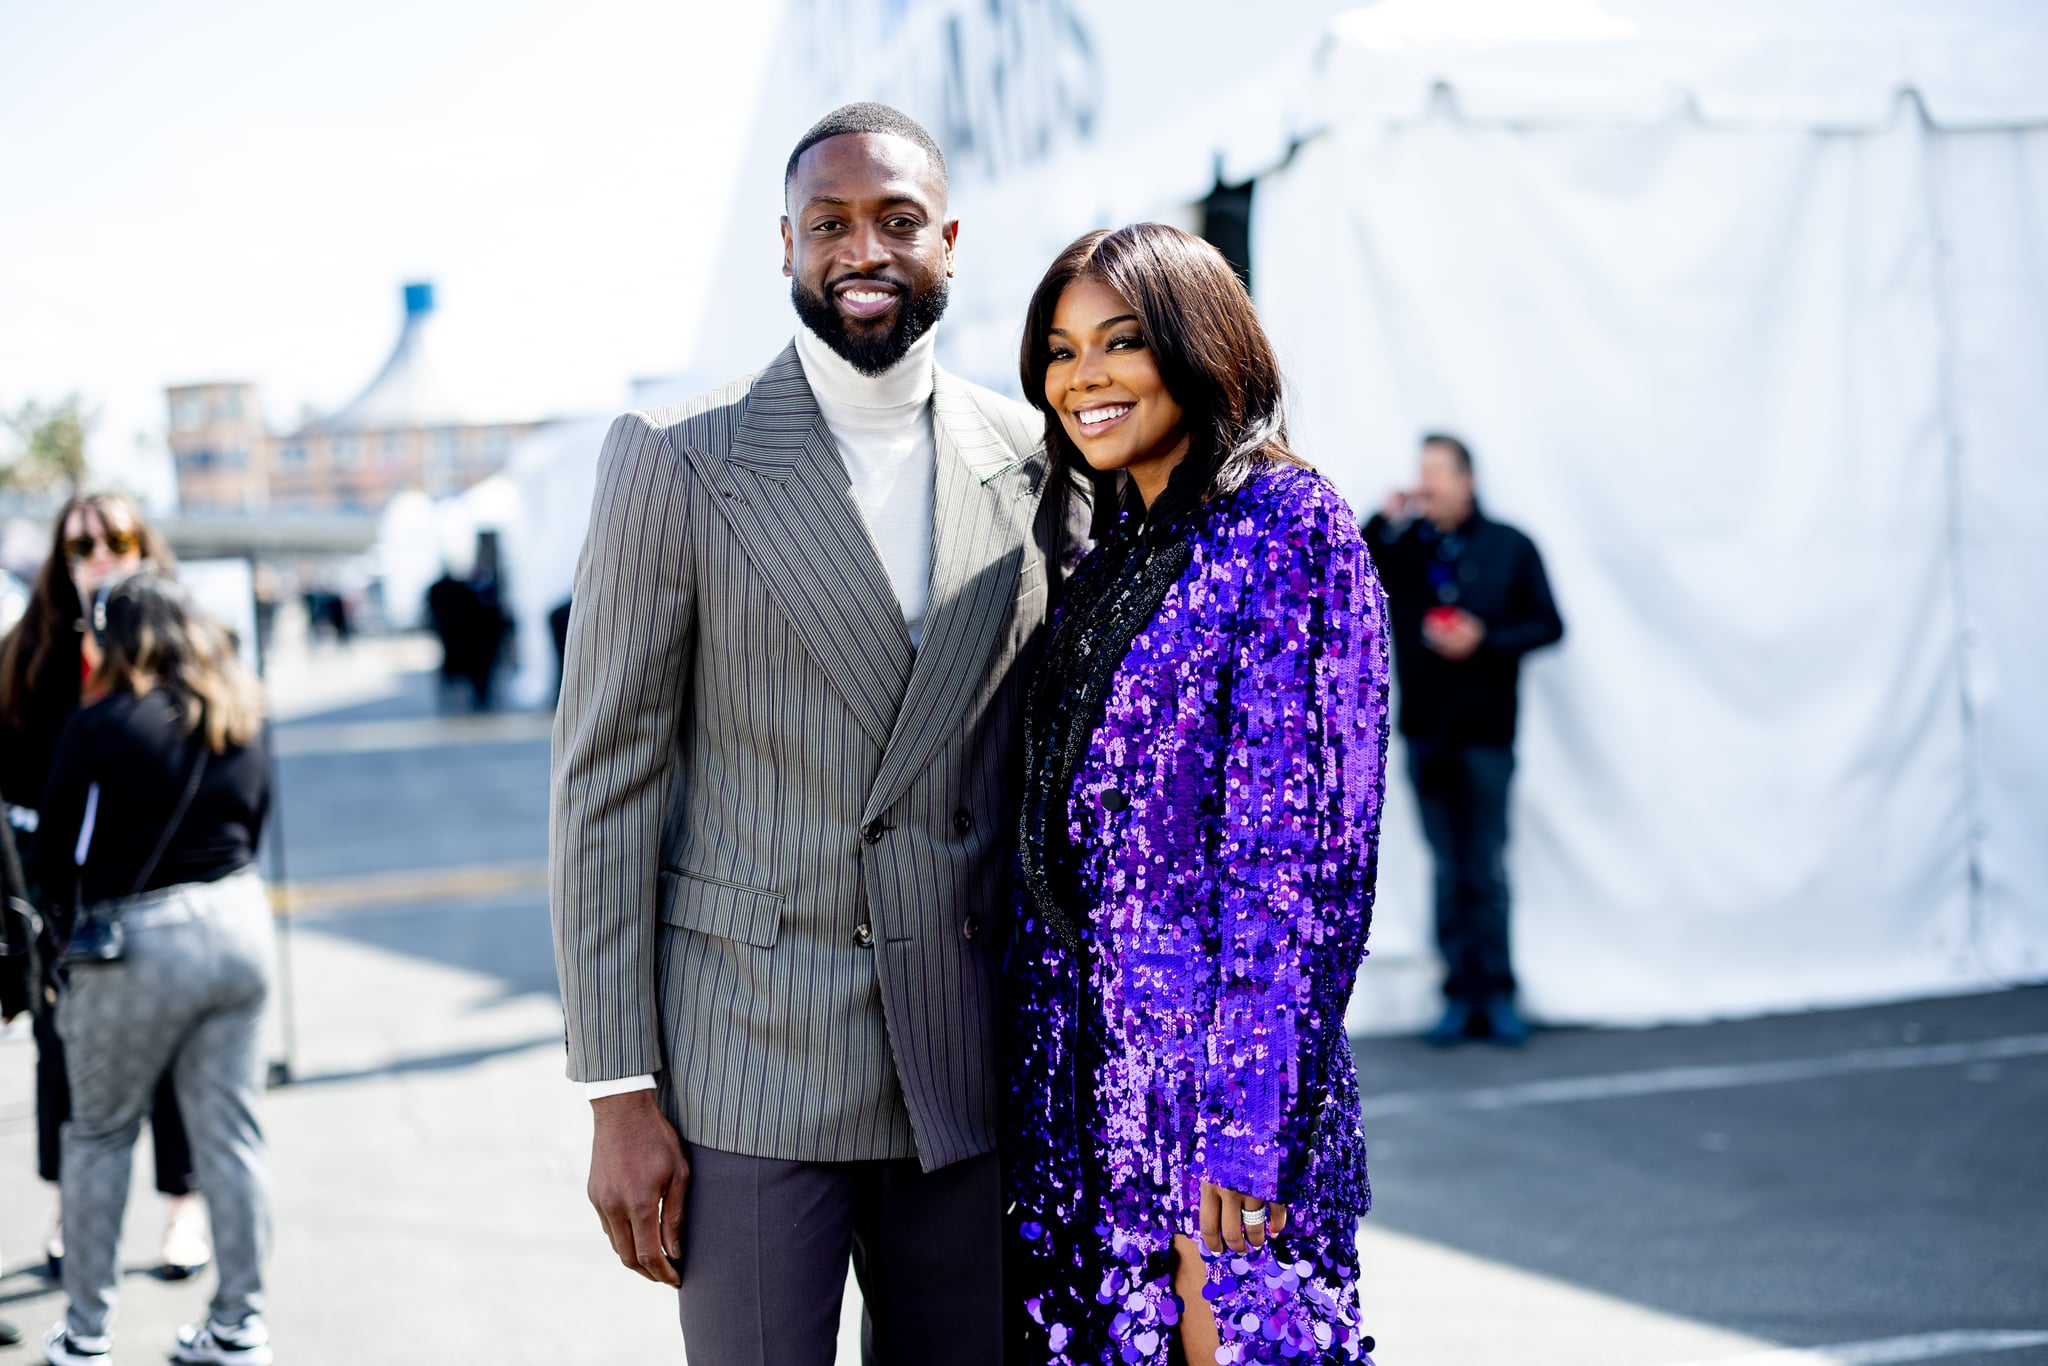 SANTA MONICA, CALIFORNIA - MARCH 04: (EDITORS NOTE: Image has been edited using digital filters) Dwyane Wade and Gabrielle Union attends the 2023 Film Independent Spirit Awards on March 04, 2023 in Santa Monica, California. (Photo by Matt Winkelmeyer/Getty Images)